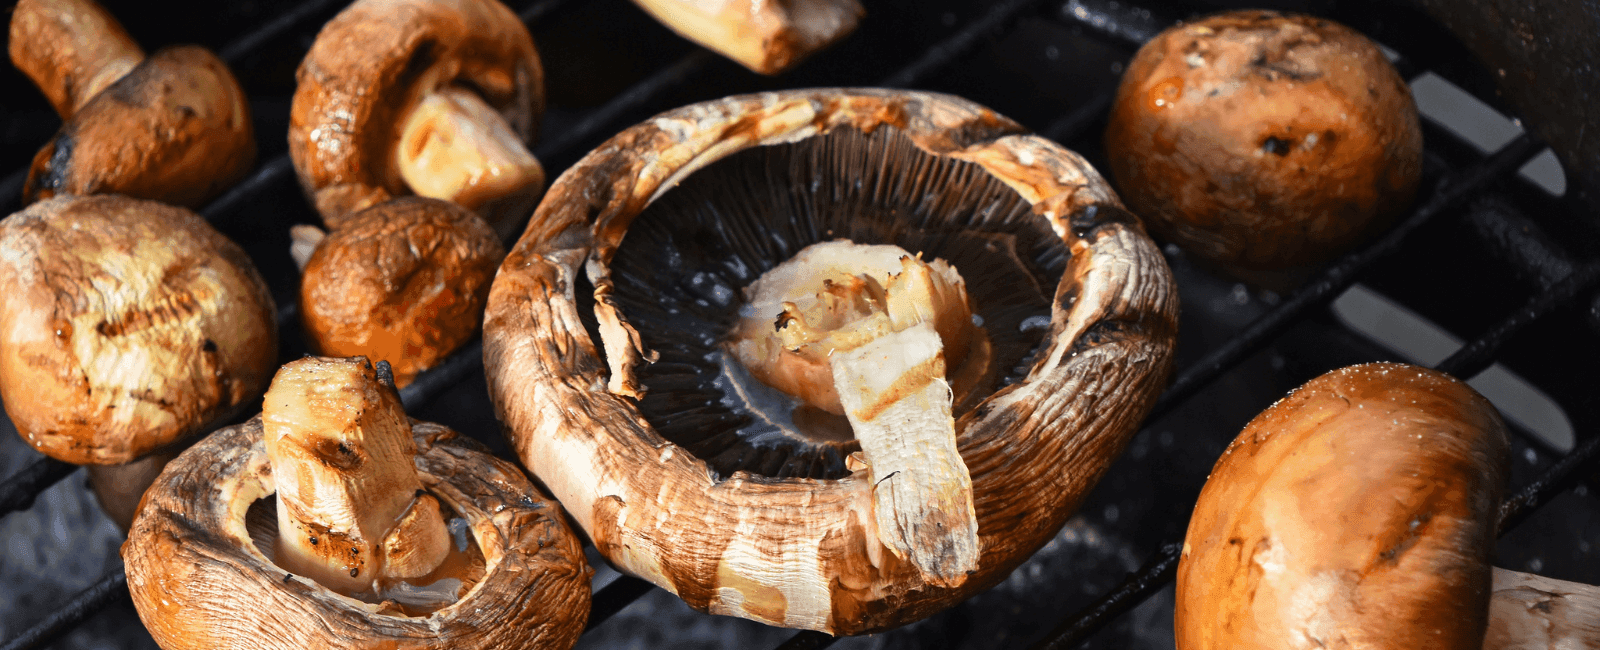 Can Mushrooms Replace Meat? A Nutritional and Culinary Comparison